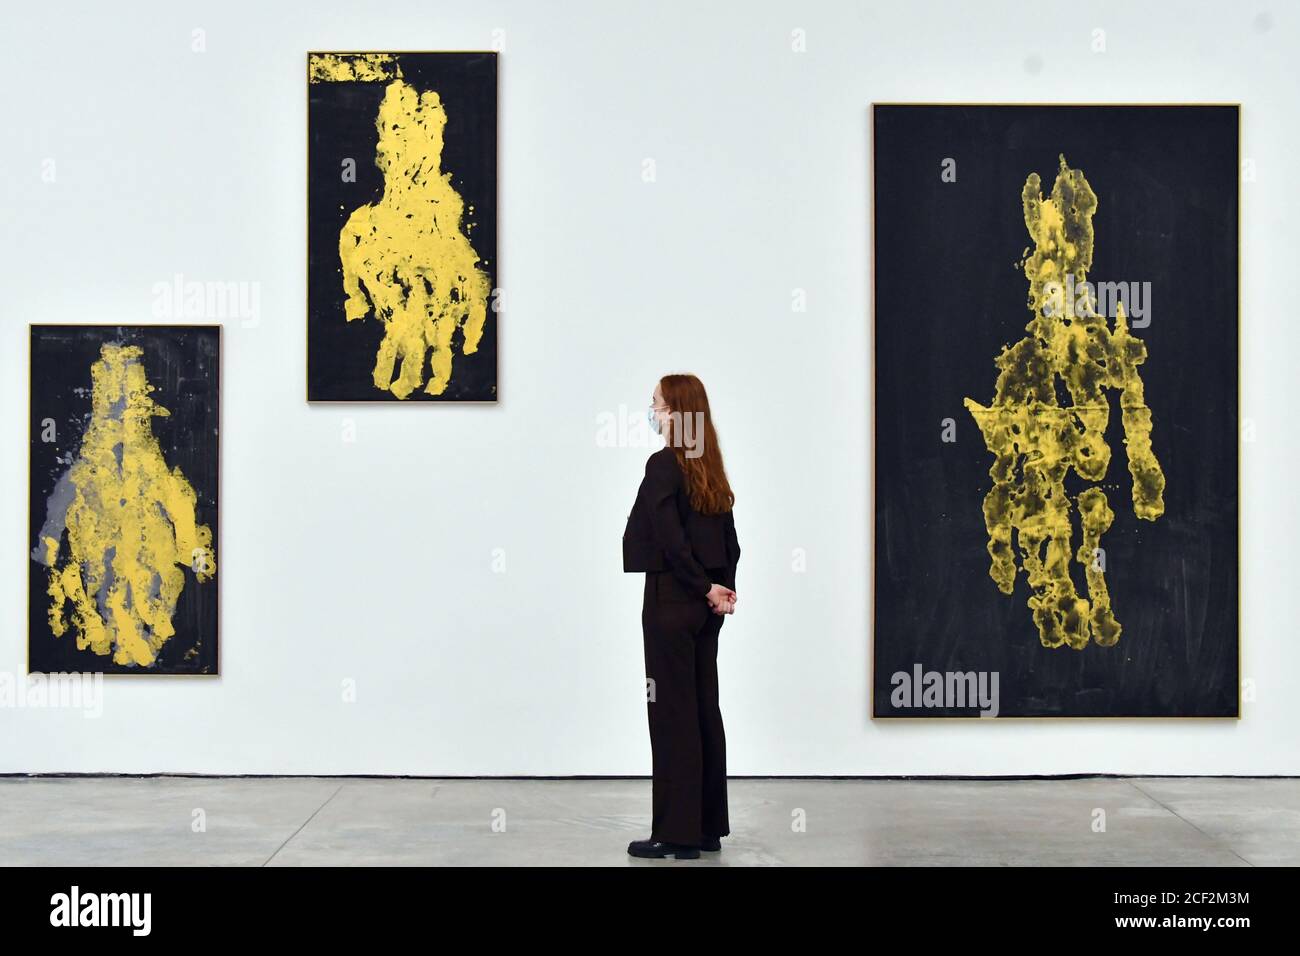 London, UK - 3 September 2020 Preview of ÔDarkness GoldnessÕ, a solo exhibition by Georg Baselitz at White Cube Mason's Yard consisting of new paintings featuring mysterious, ghostly hands rendered in gold, alongside related drawings and fire-gilded bronze reliefs, the artistÕs first sculptural works in almost a decade. (L-R) Mano meno, 2019, Mettere mano a C anfangen, 2019, Manomorta 2019Credit: Nils Jorgensen/Alamy Live News Stock Photo